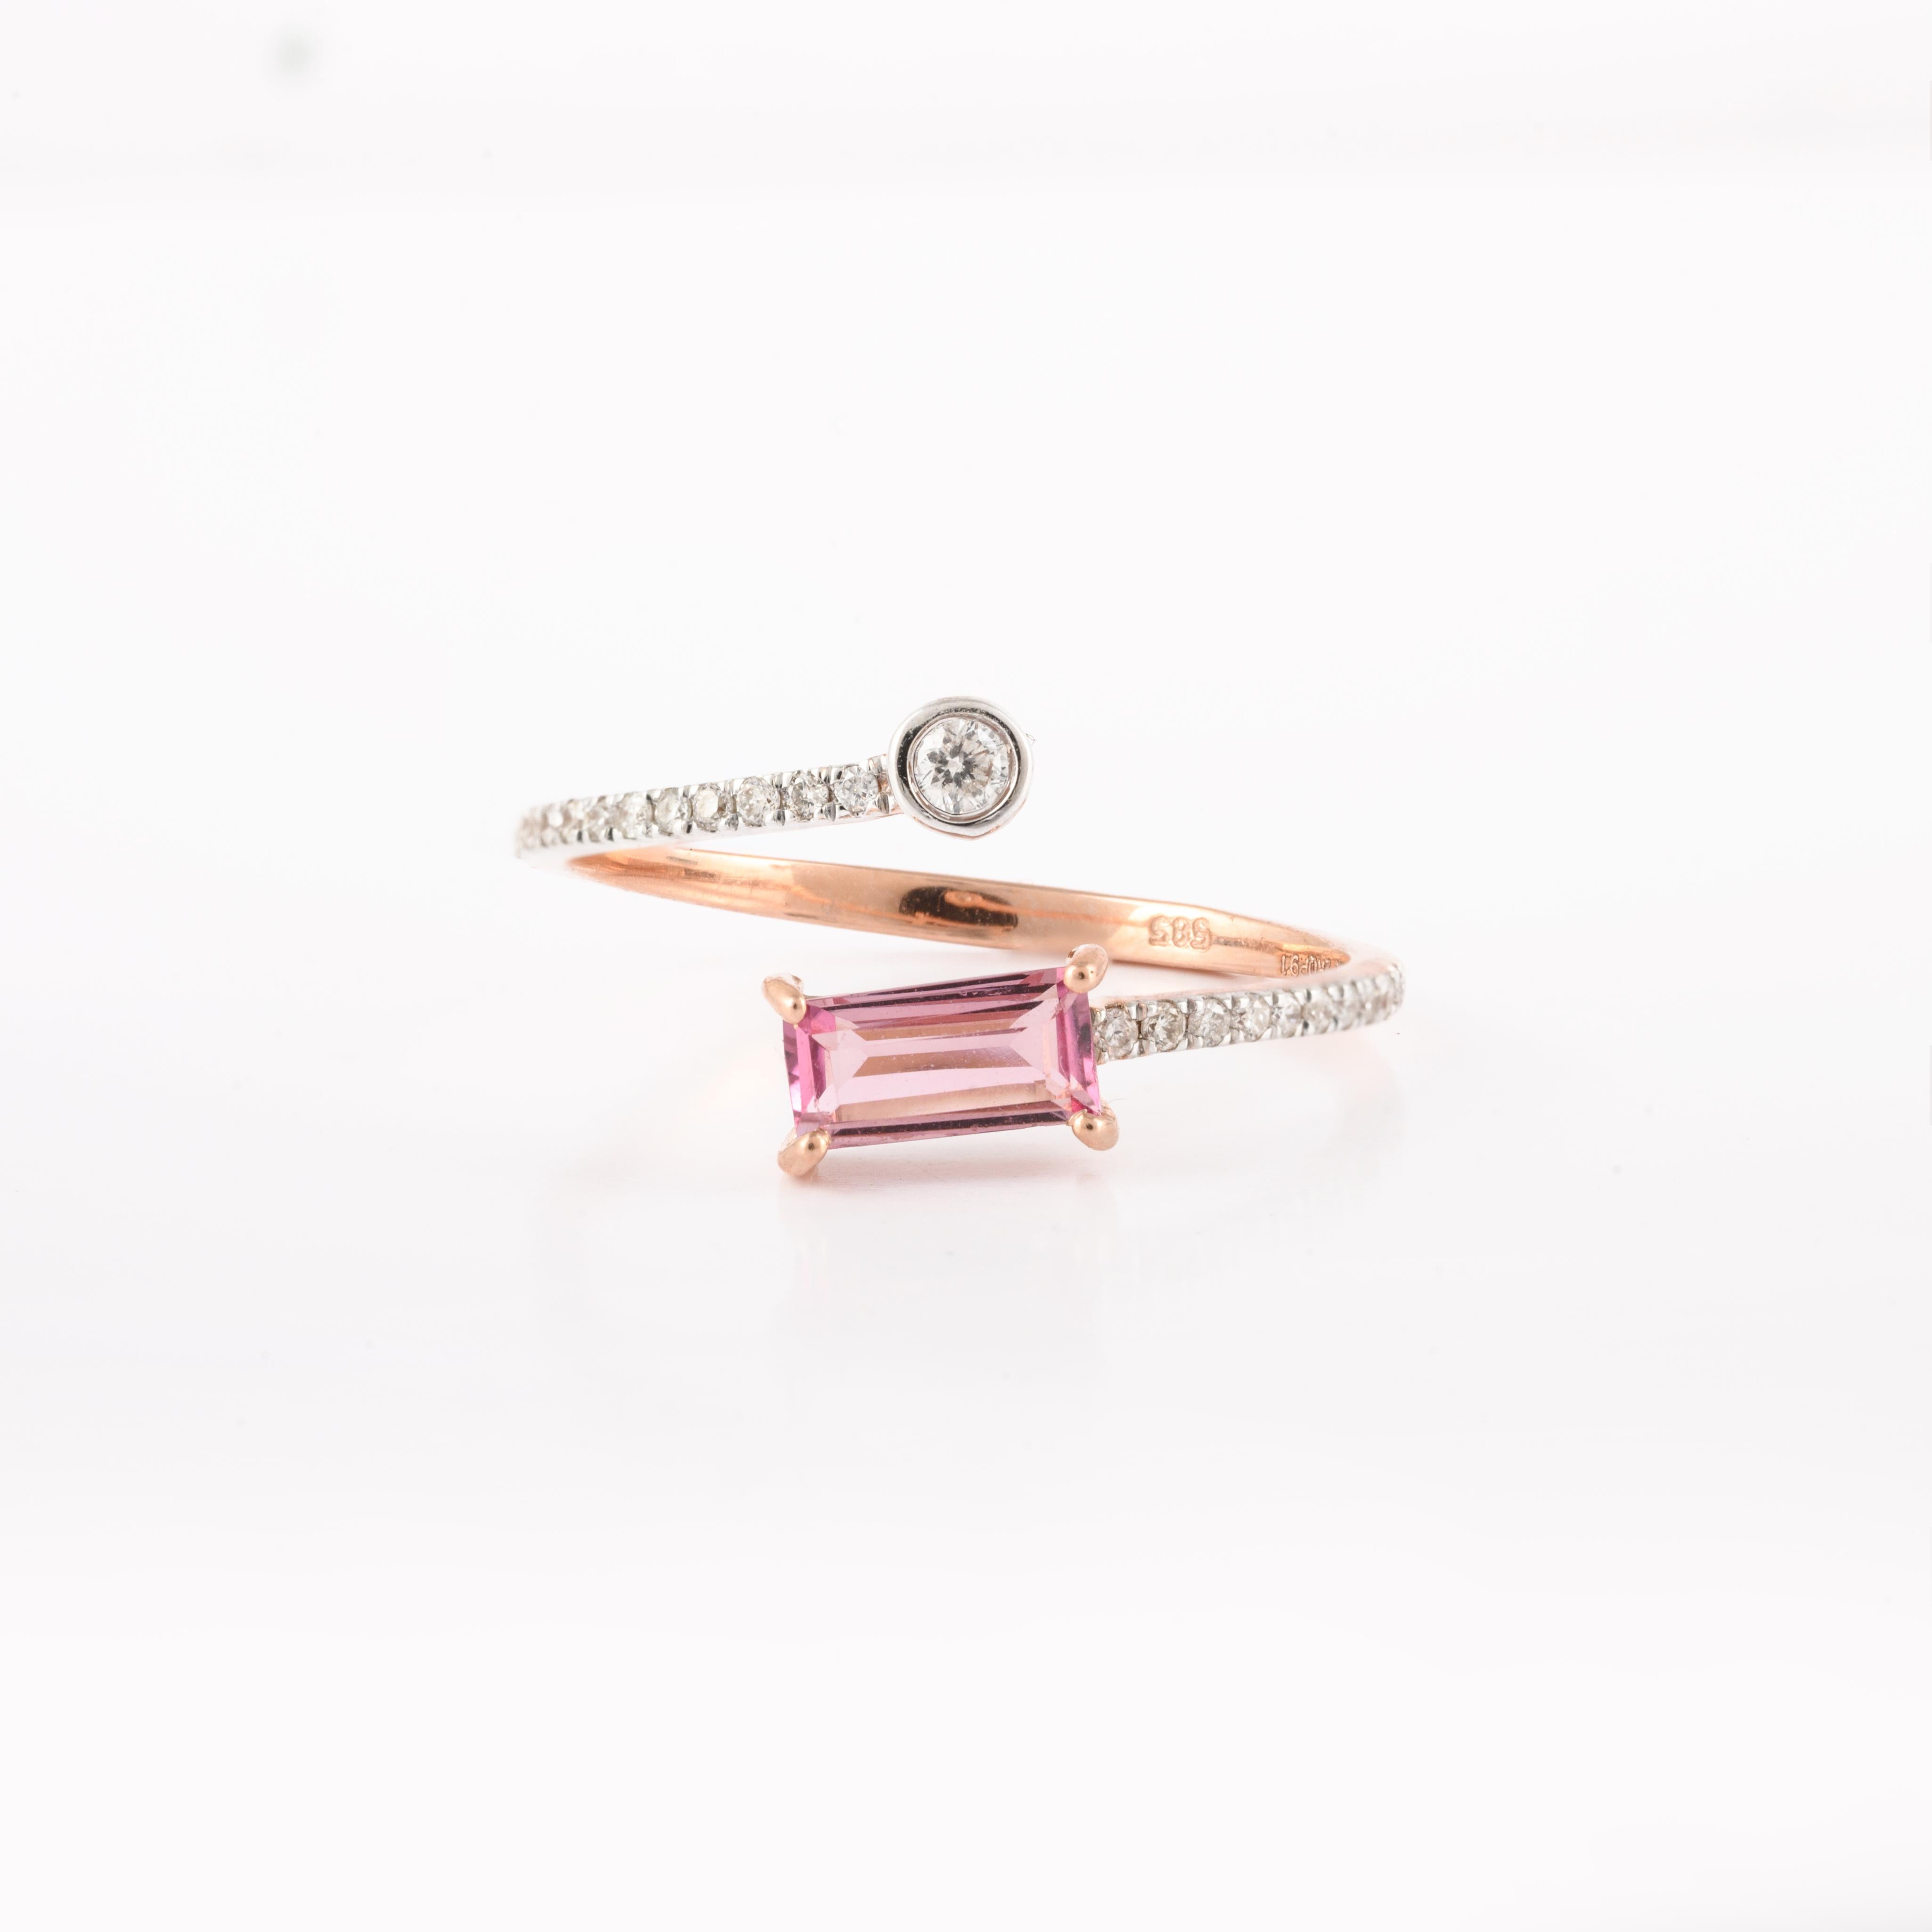 For Sale:  14k Solid Rose Gold Diamond and Baguette Cut Pink Tourmaline Wrap Ring 3